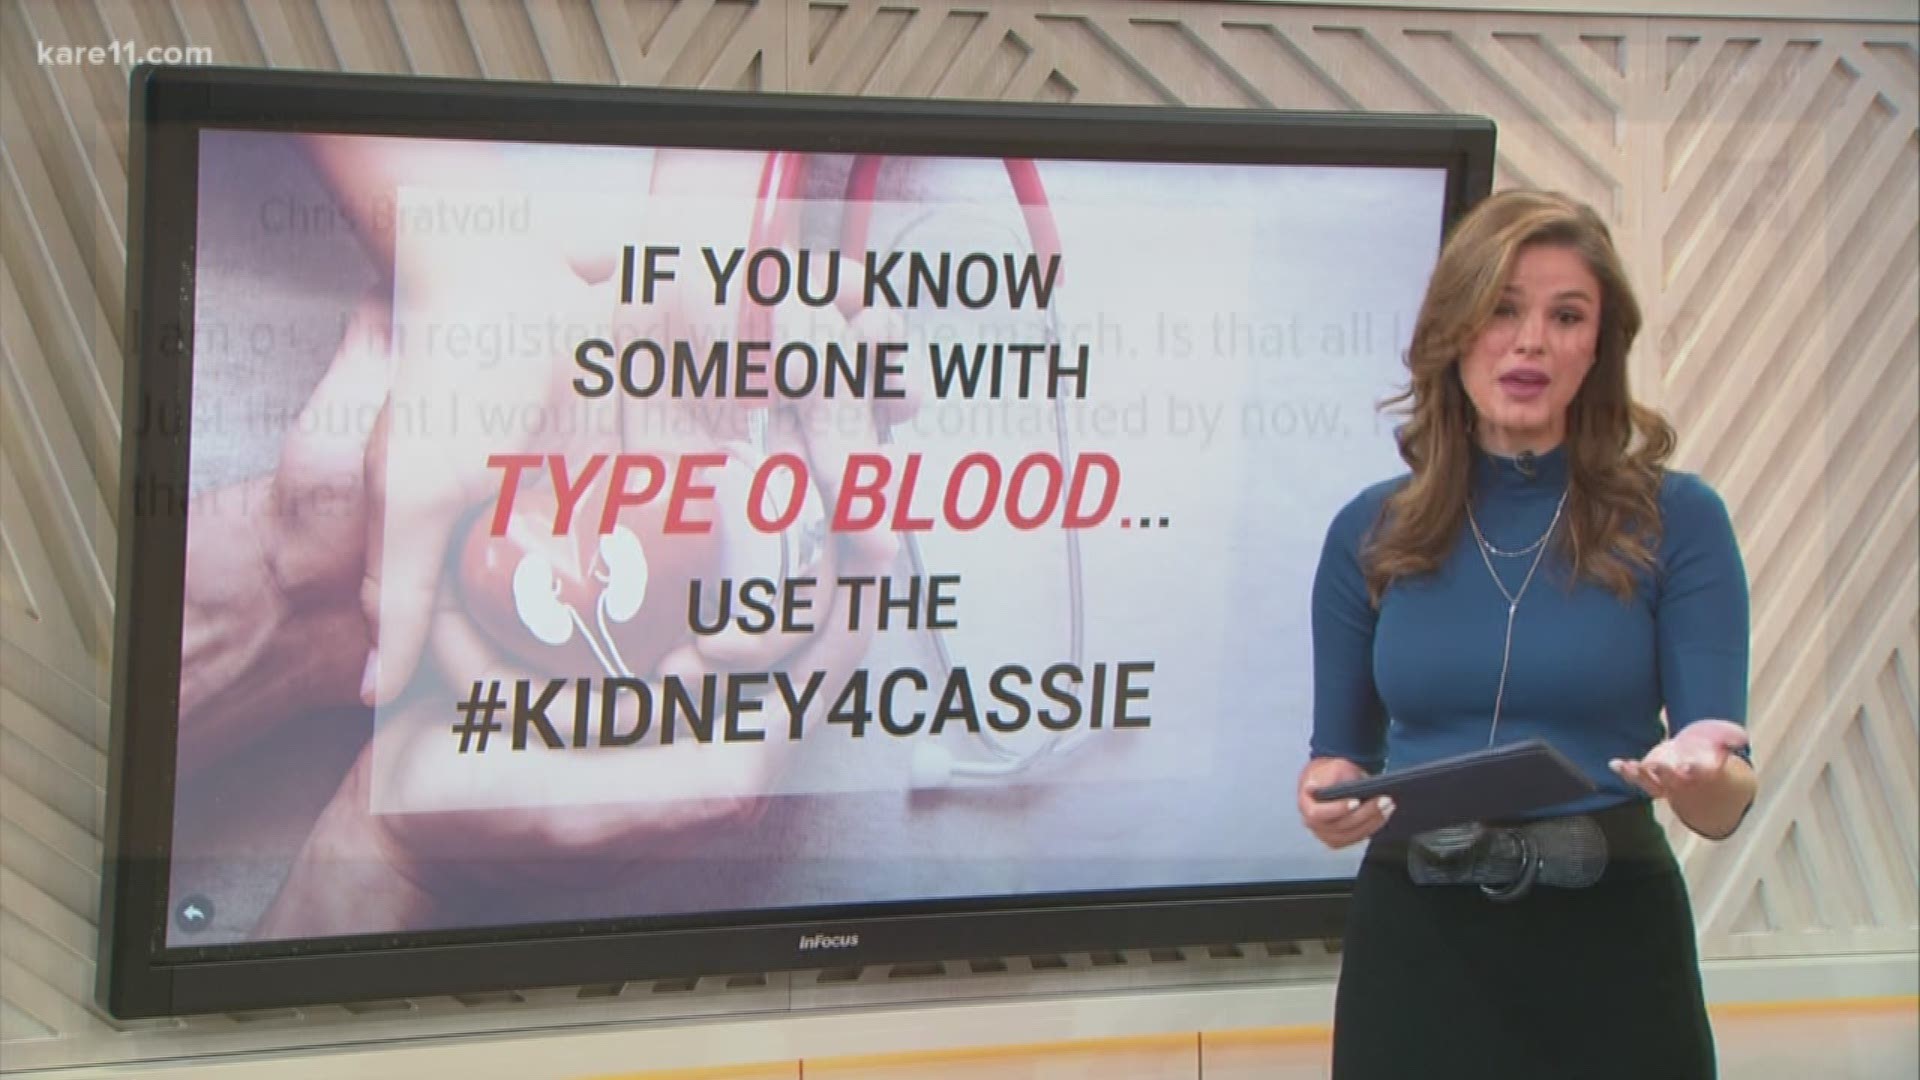 Do you know or are you someone with Type 'O' blood?